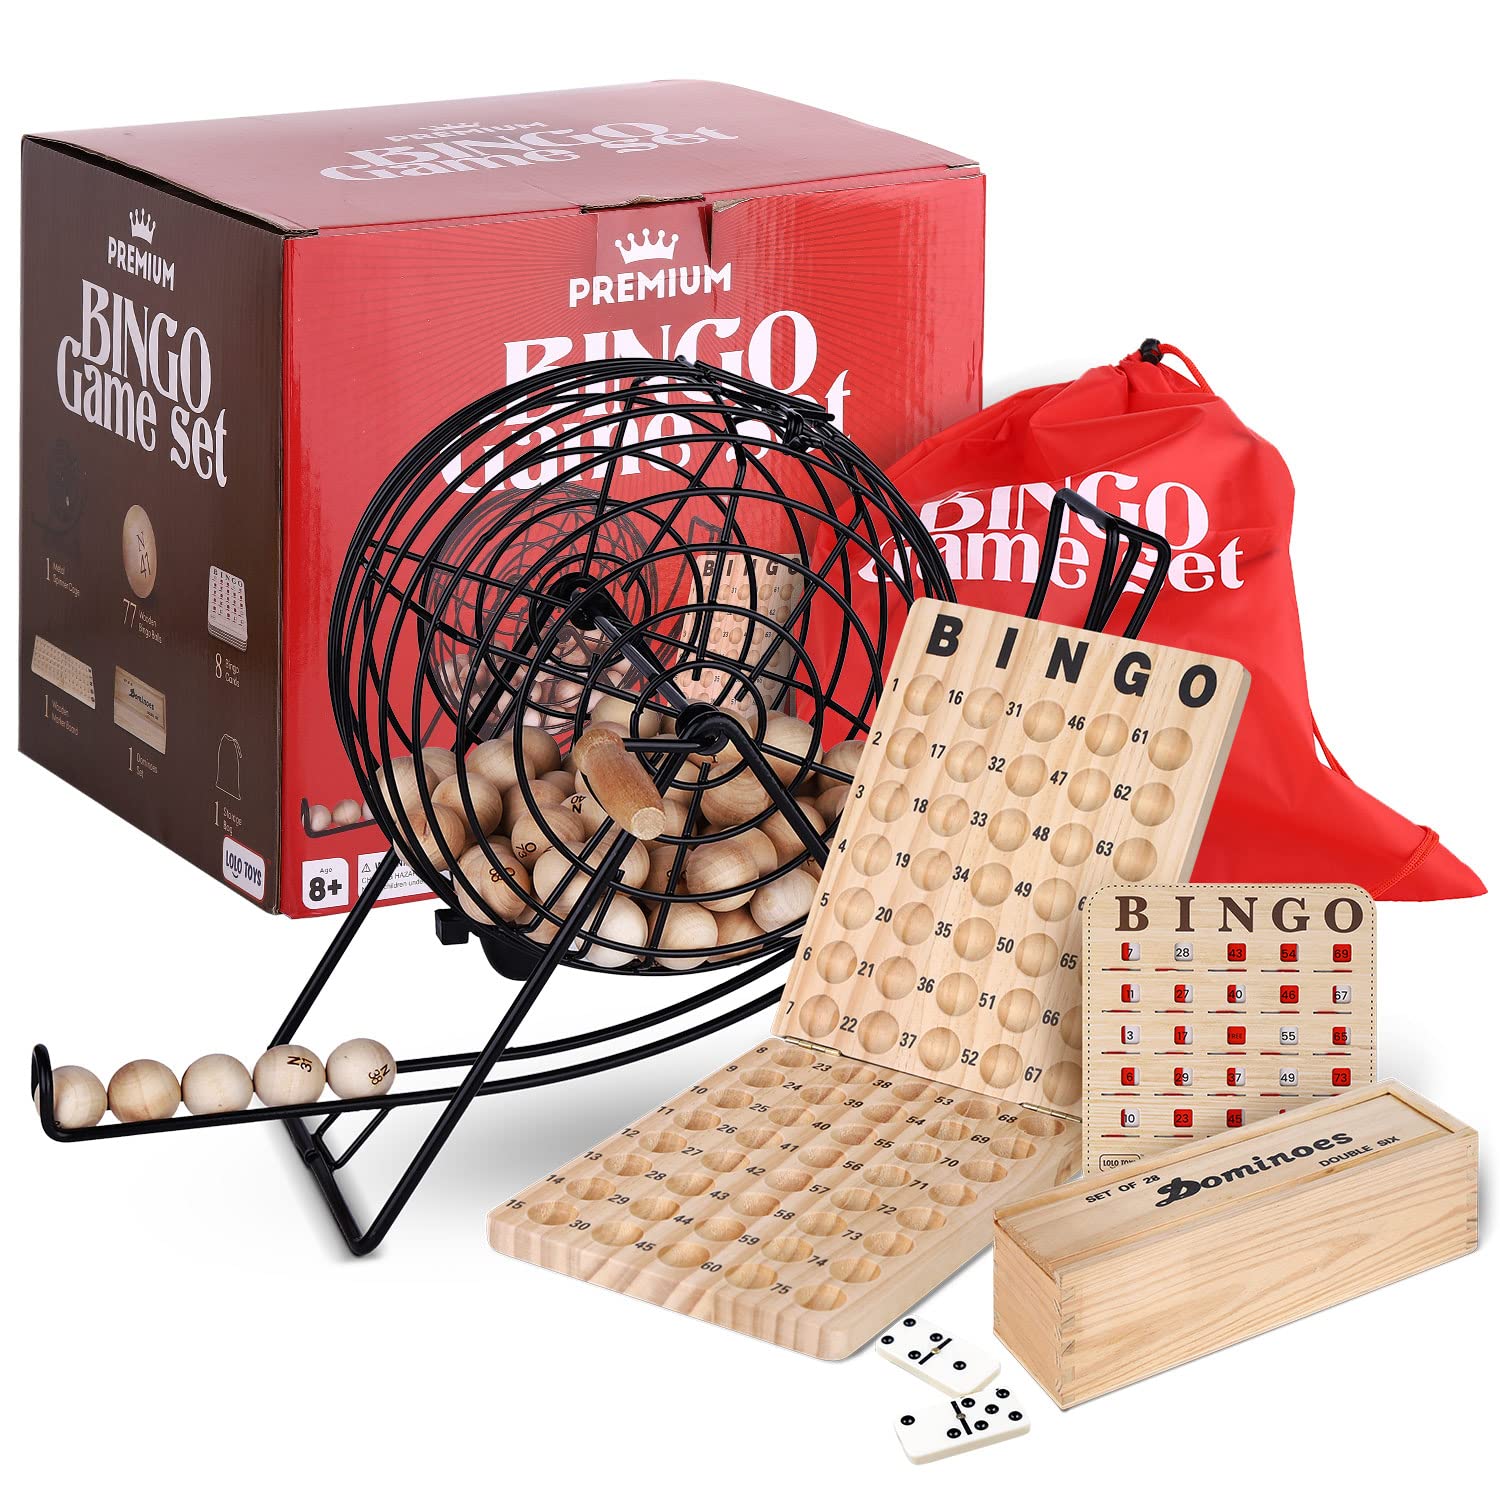 Lolo Toys Professional Deluxe Bingo game Set - Bundle with Dominoes Set - Bingo cage, Balls, cards, Storage Bag for Kids, Adults, Family g